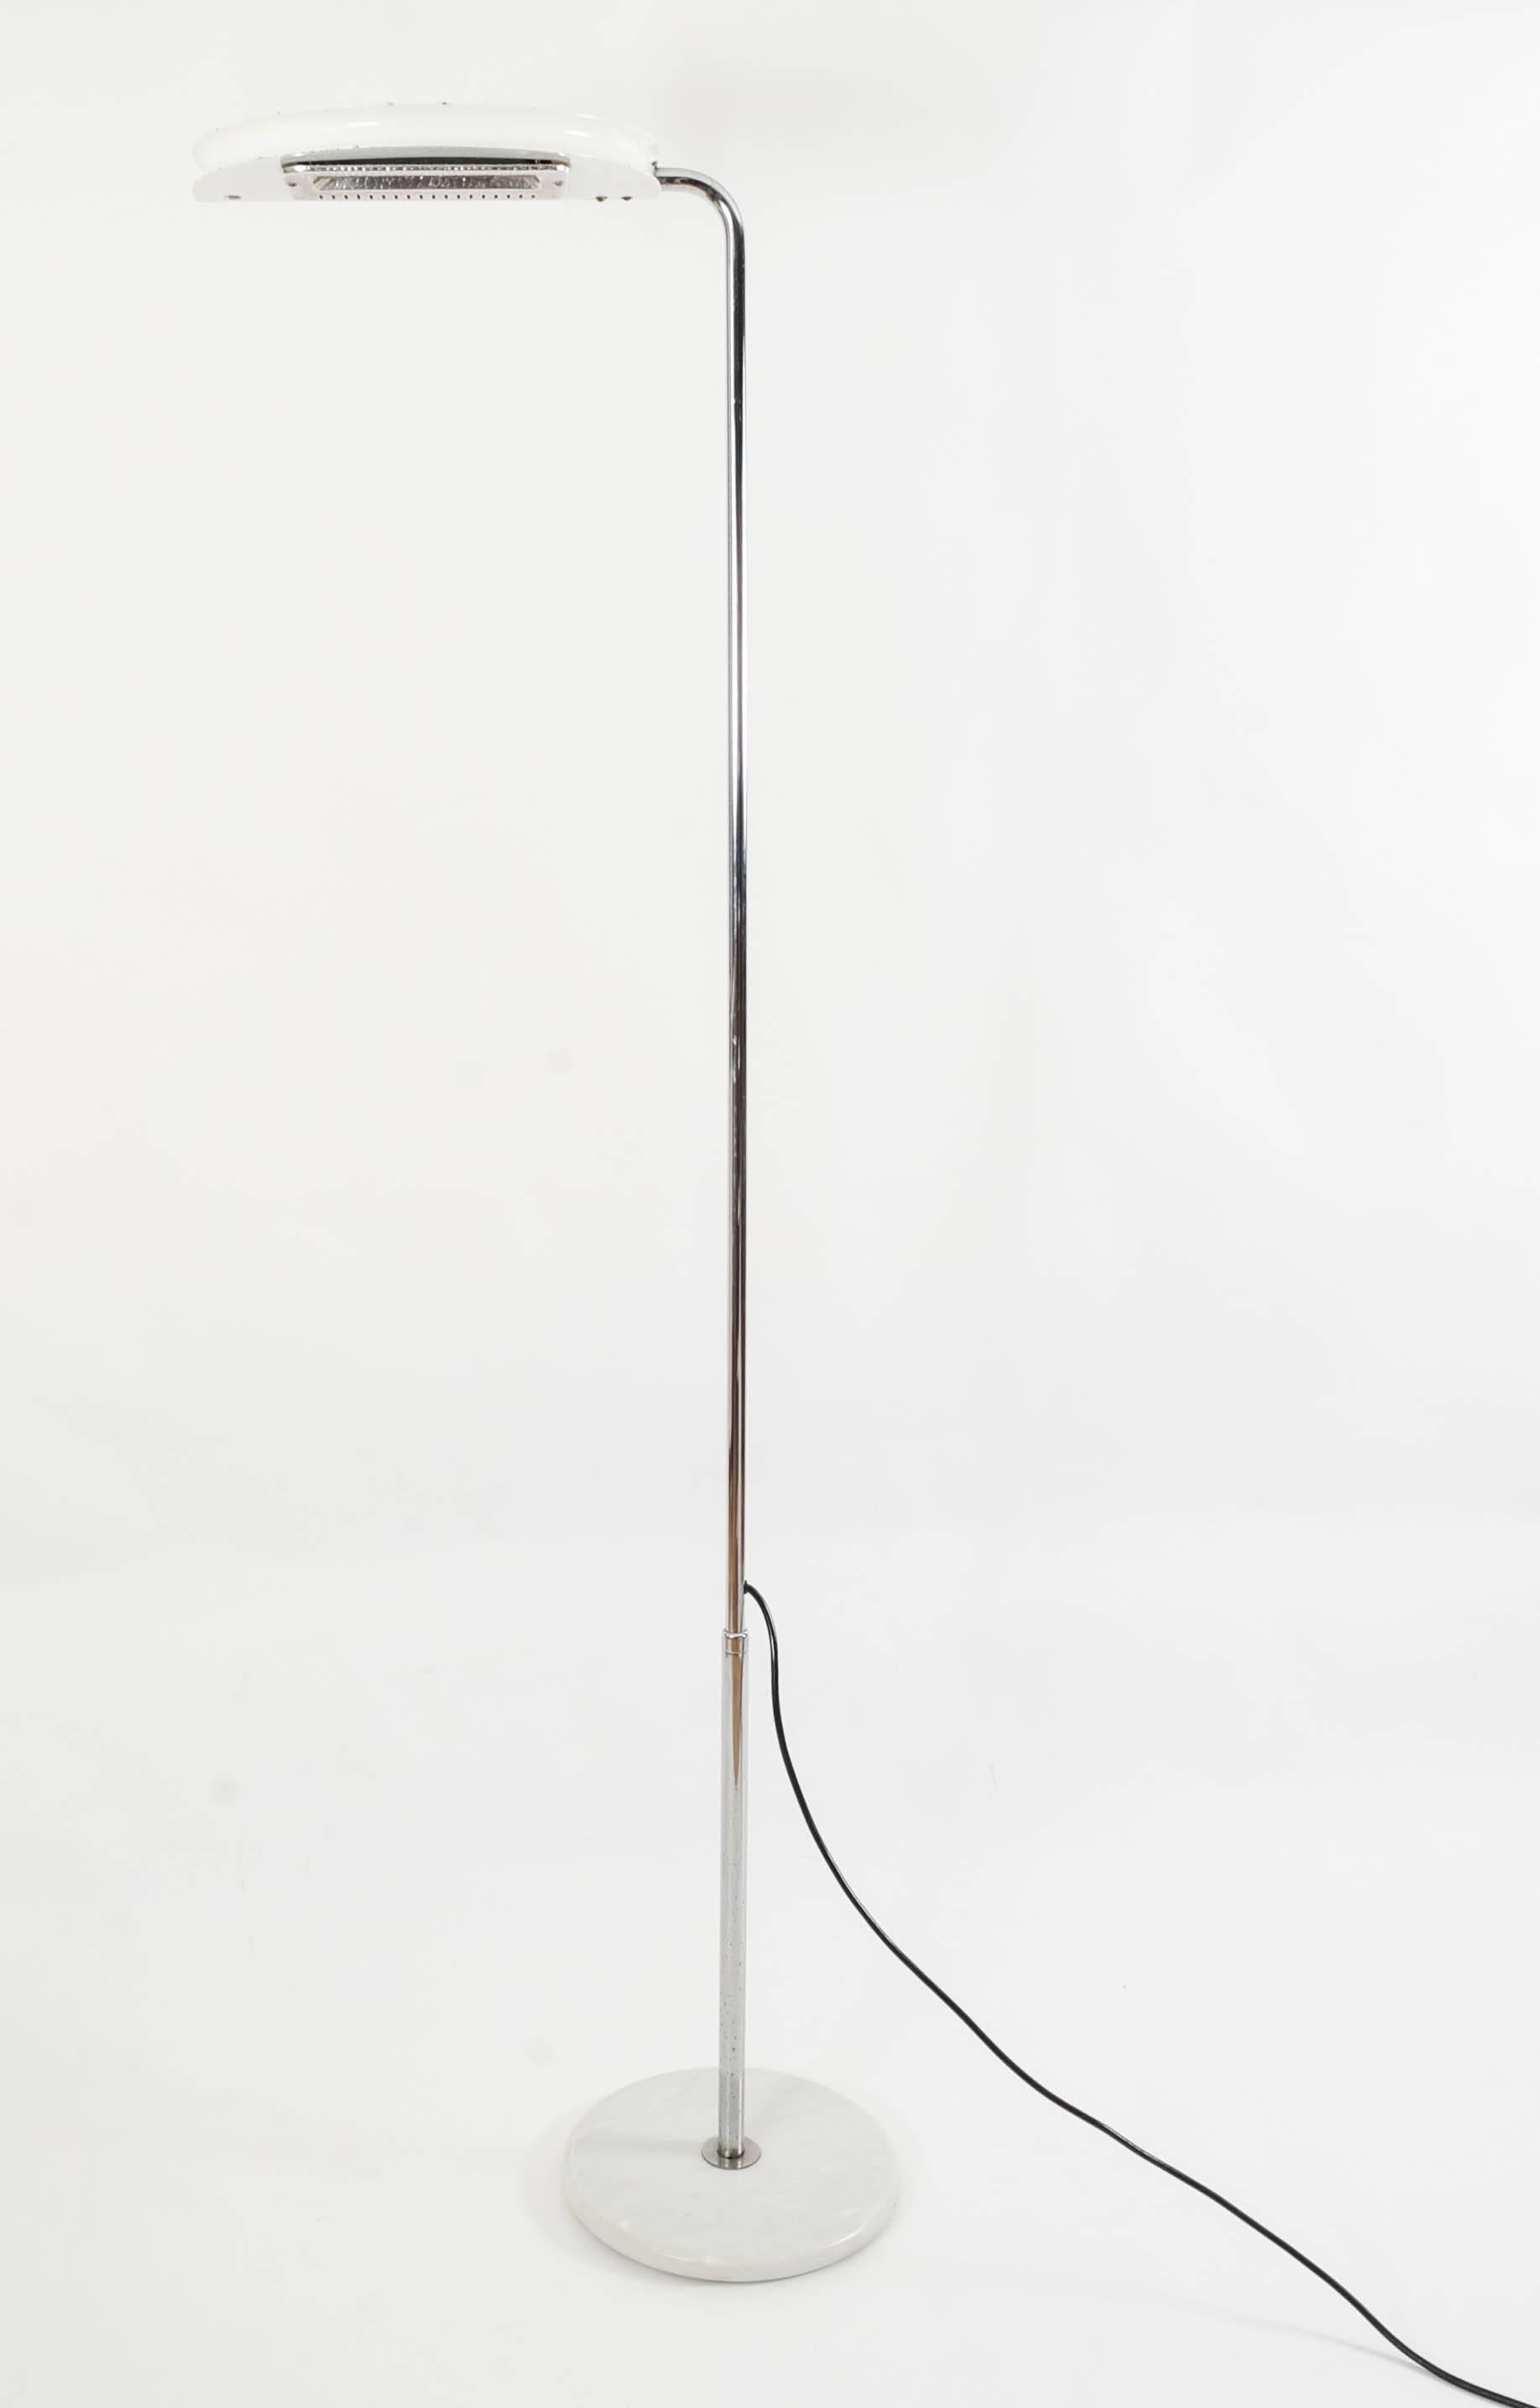 The Mezzaluna (Half-Moon) Floor Lamp was designed in 1975 by Bruno Gecchelin for Skipper.
It has a white metal light fixture and a base made of Carrara marble. 
Built-in dimmer. 
The height is adjustable.